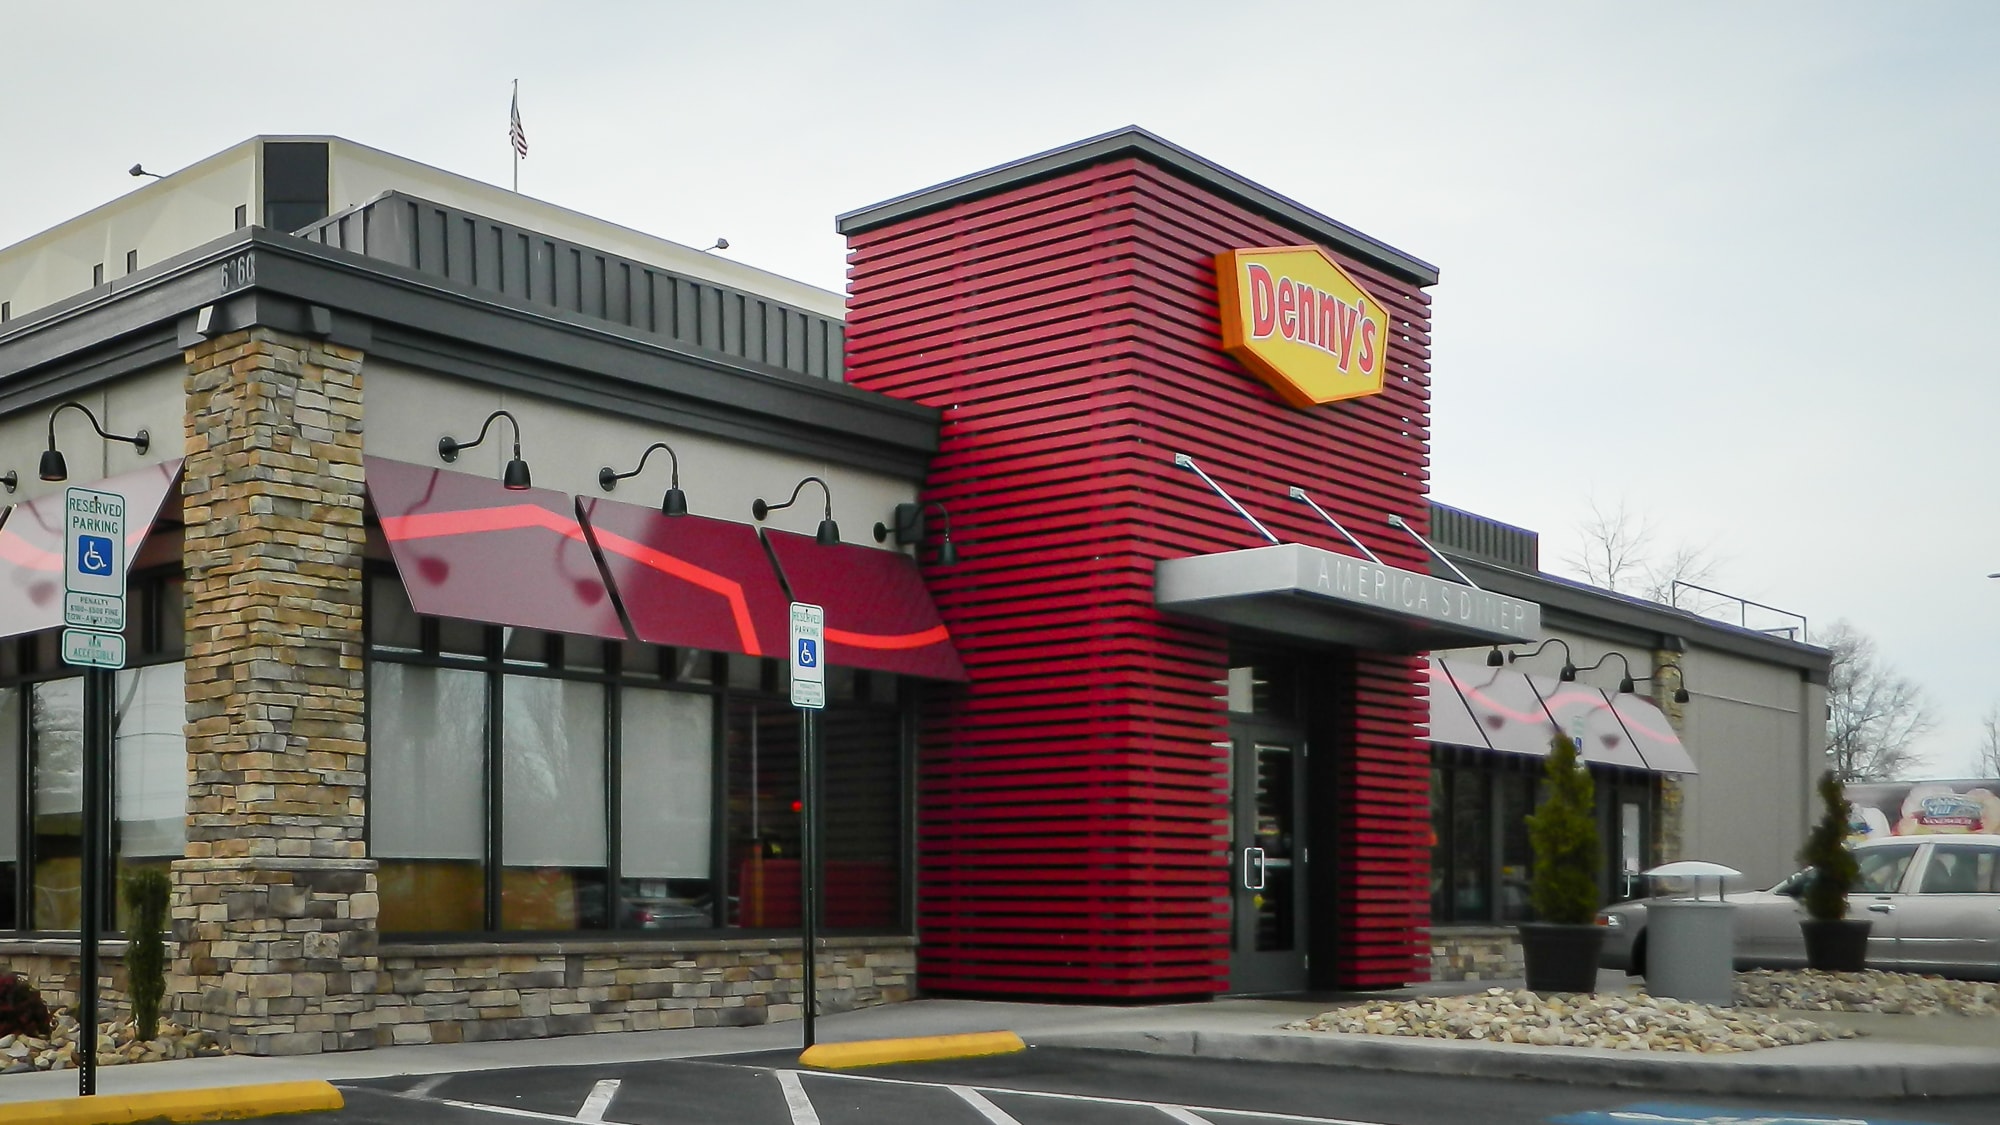 Awnex Featured Project -Architectural Aluminum Wall Screens - Denny’s - Norfolk, Virginia